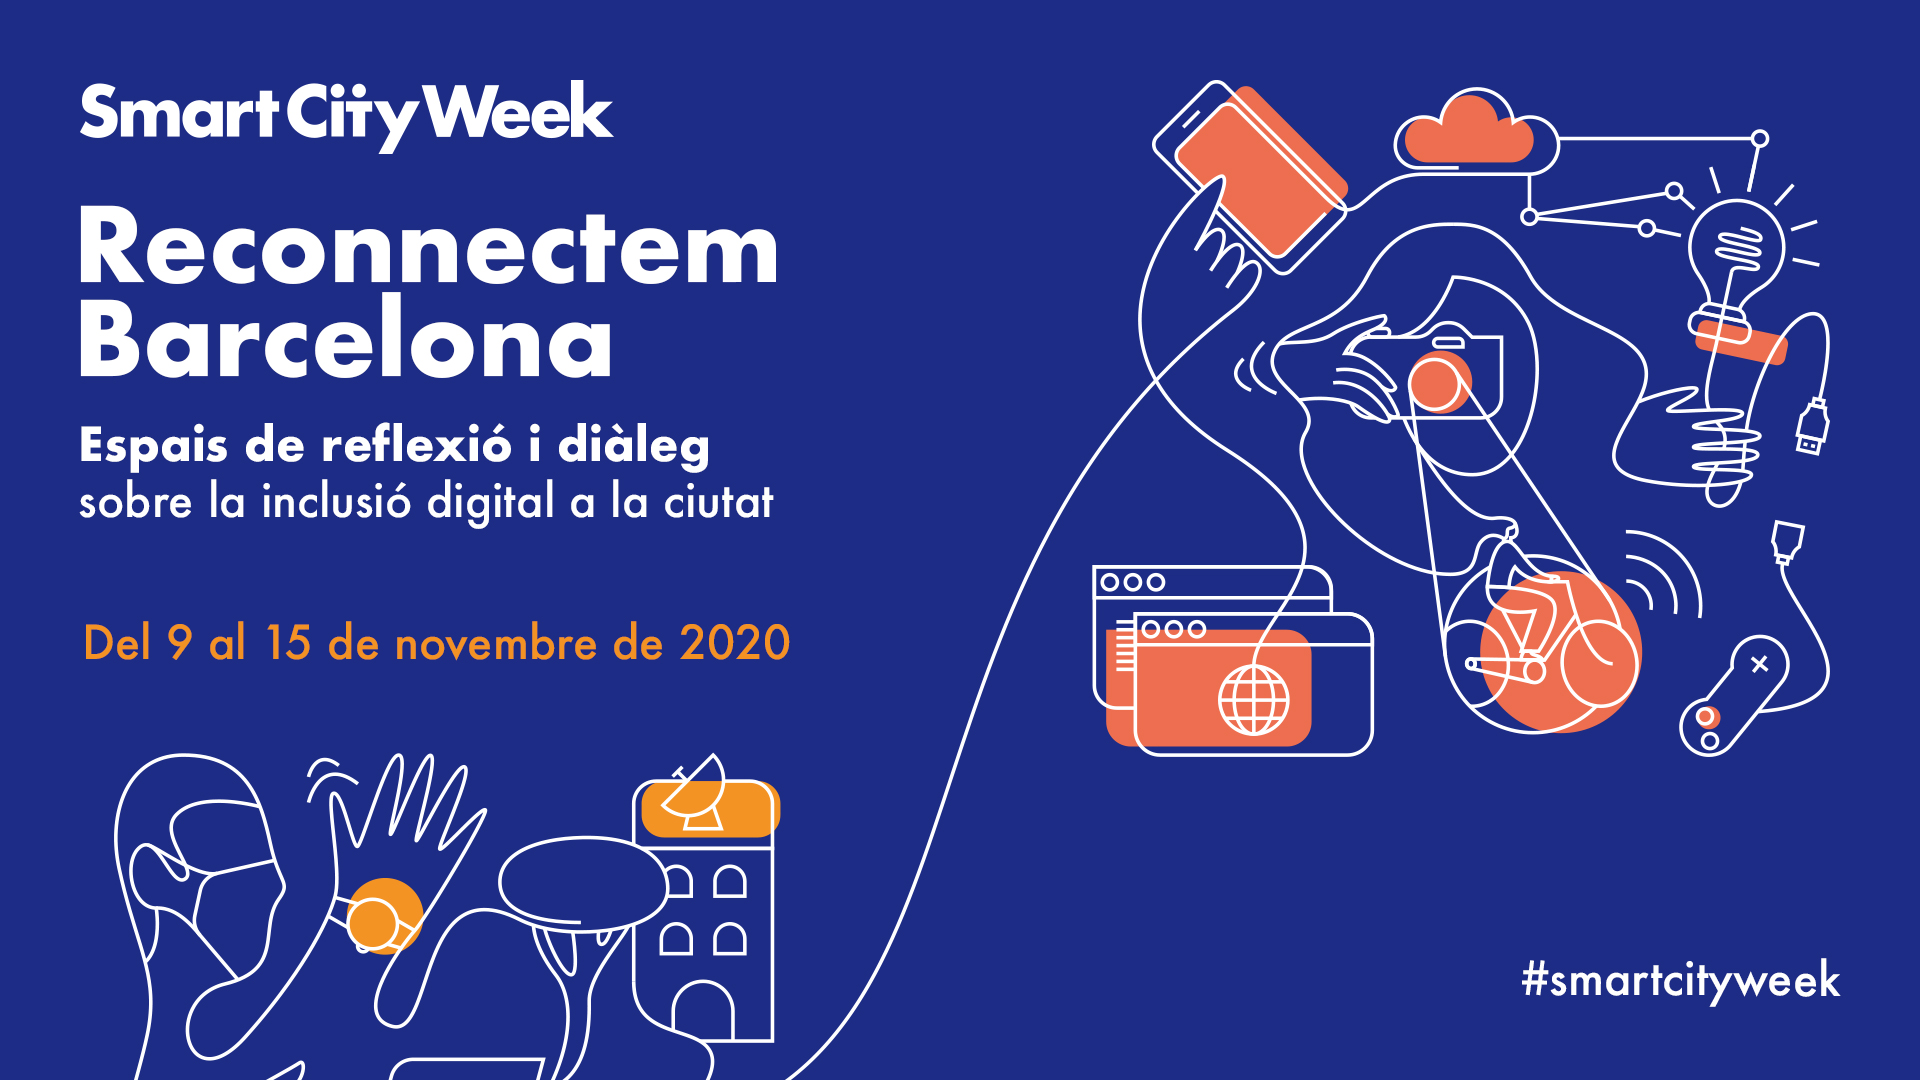 Smart City Week returns with a new edition focusing on digital inclusion